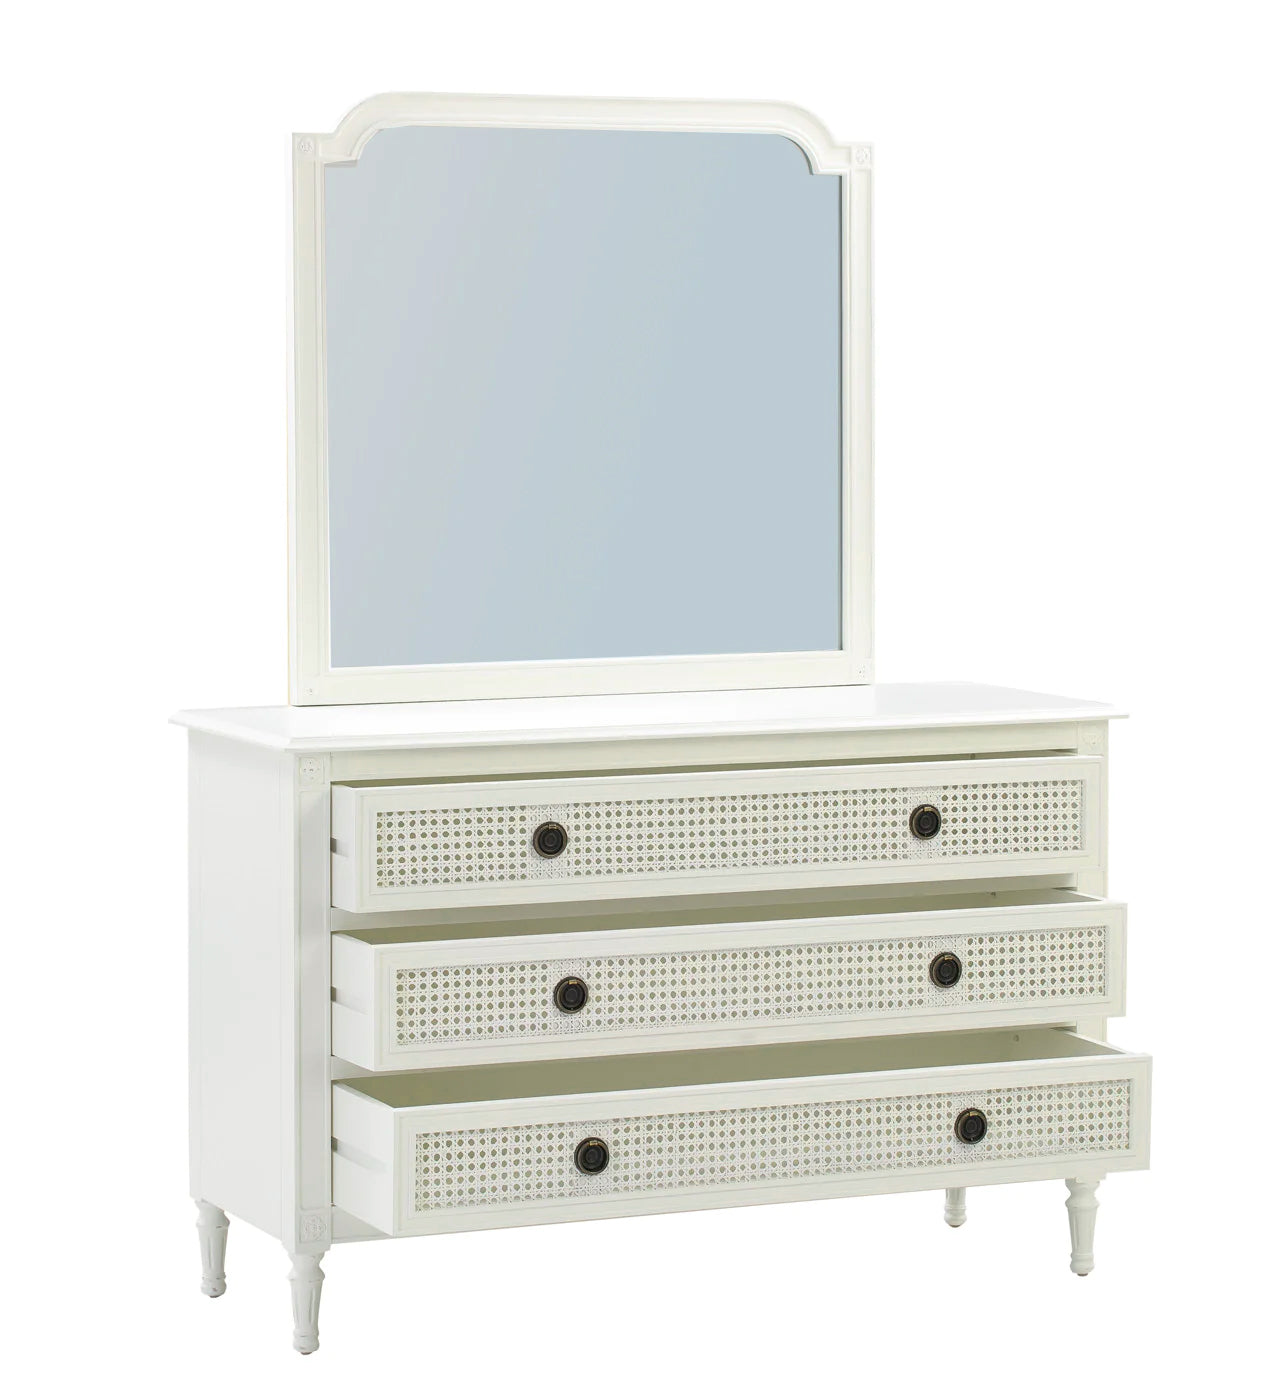 BORDEAUX Dressing Table Mirror French Style White "Distressed" Finish